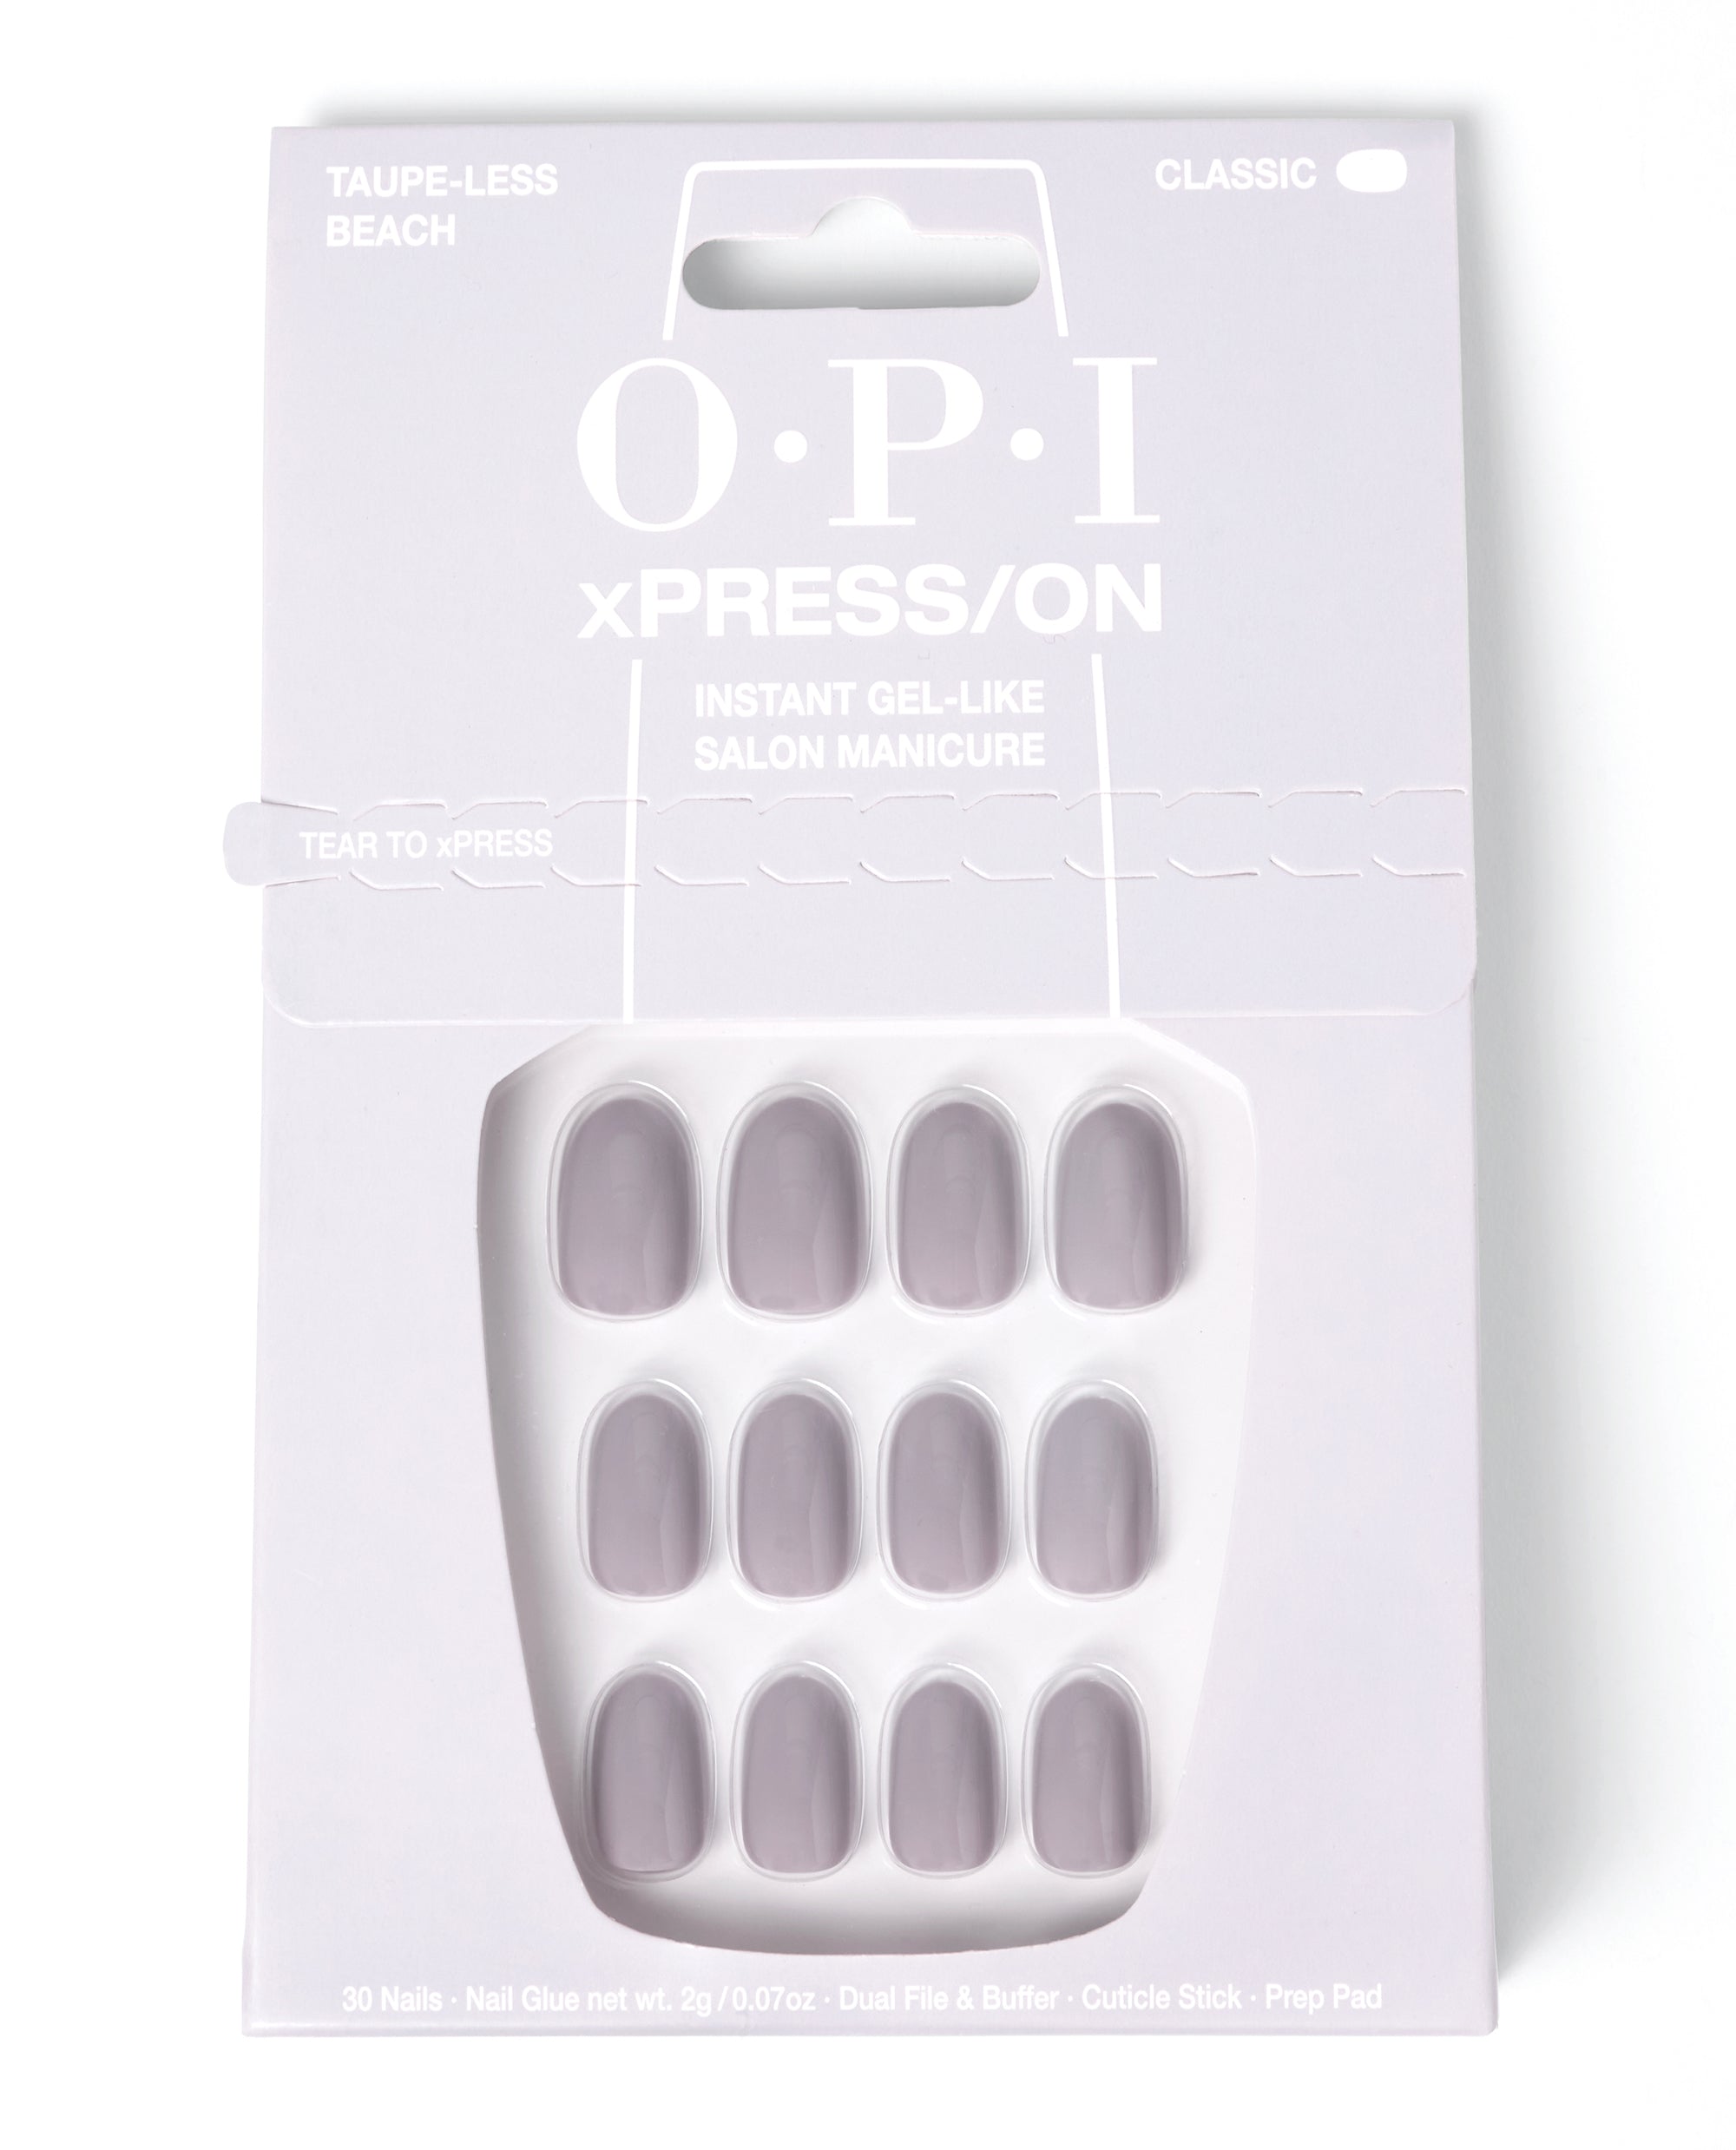 OPI®: Taupe-less Beach - Press-On Nails